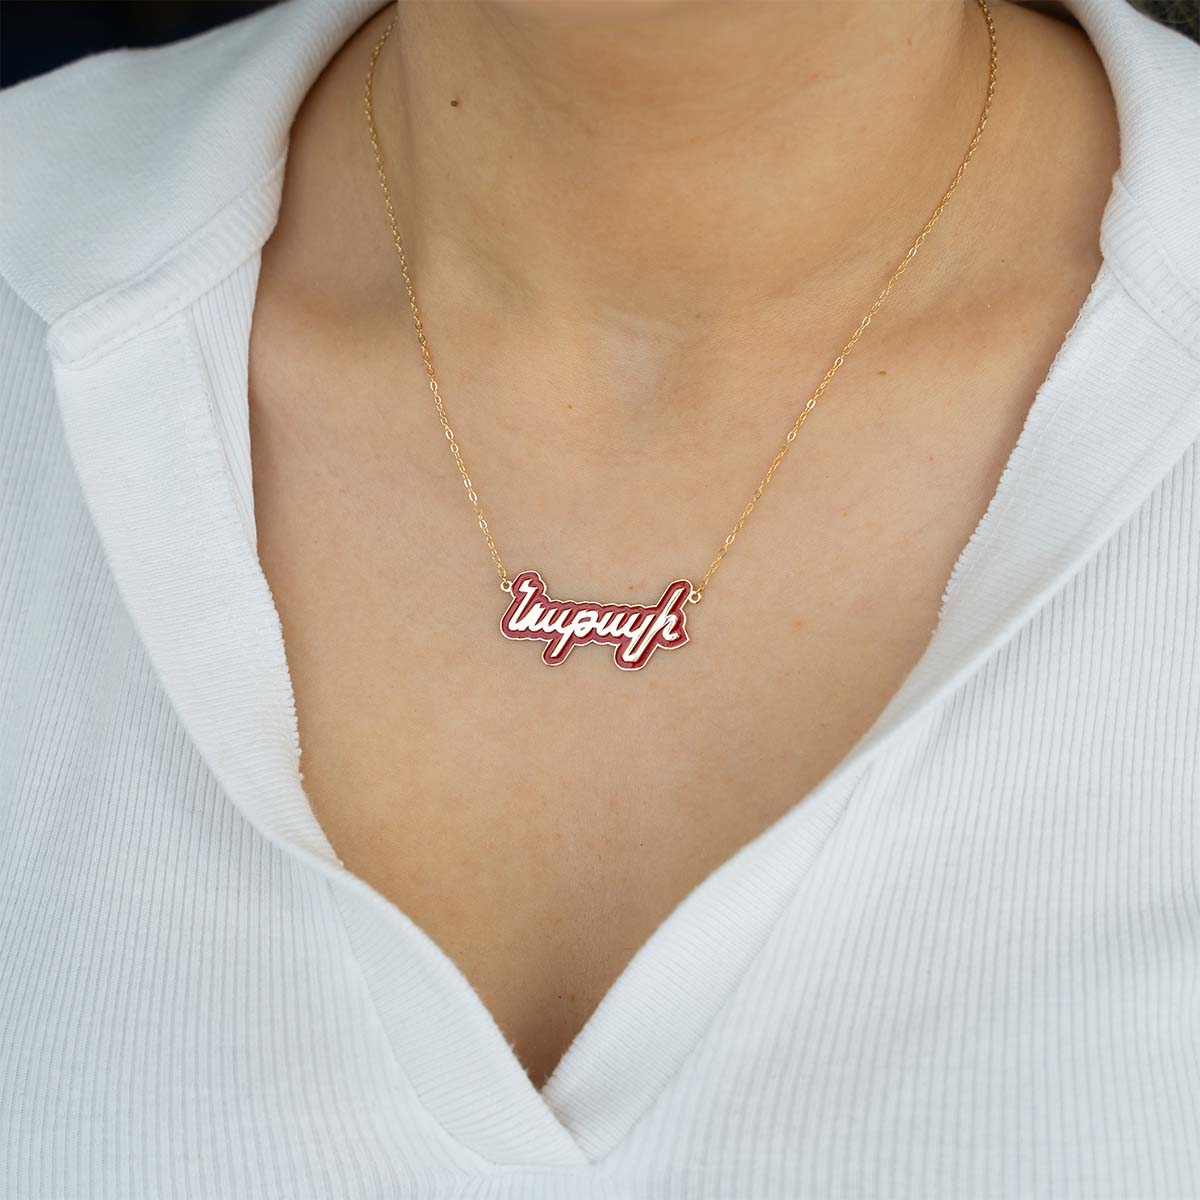 Armenian Name Necklace with Red Enamel Outline